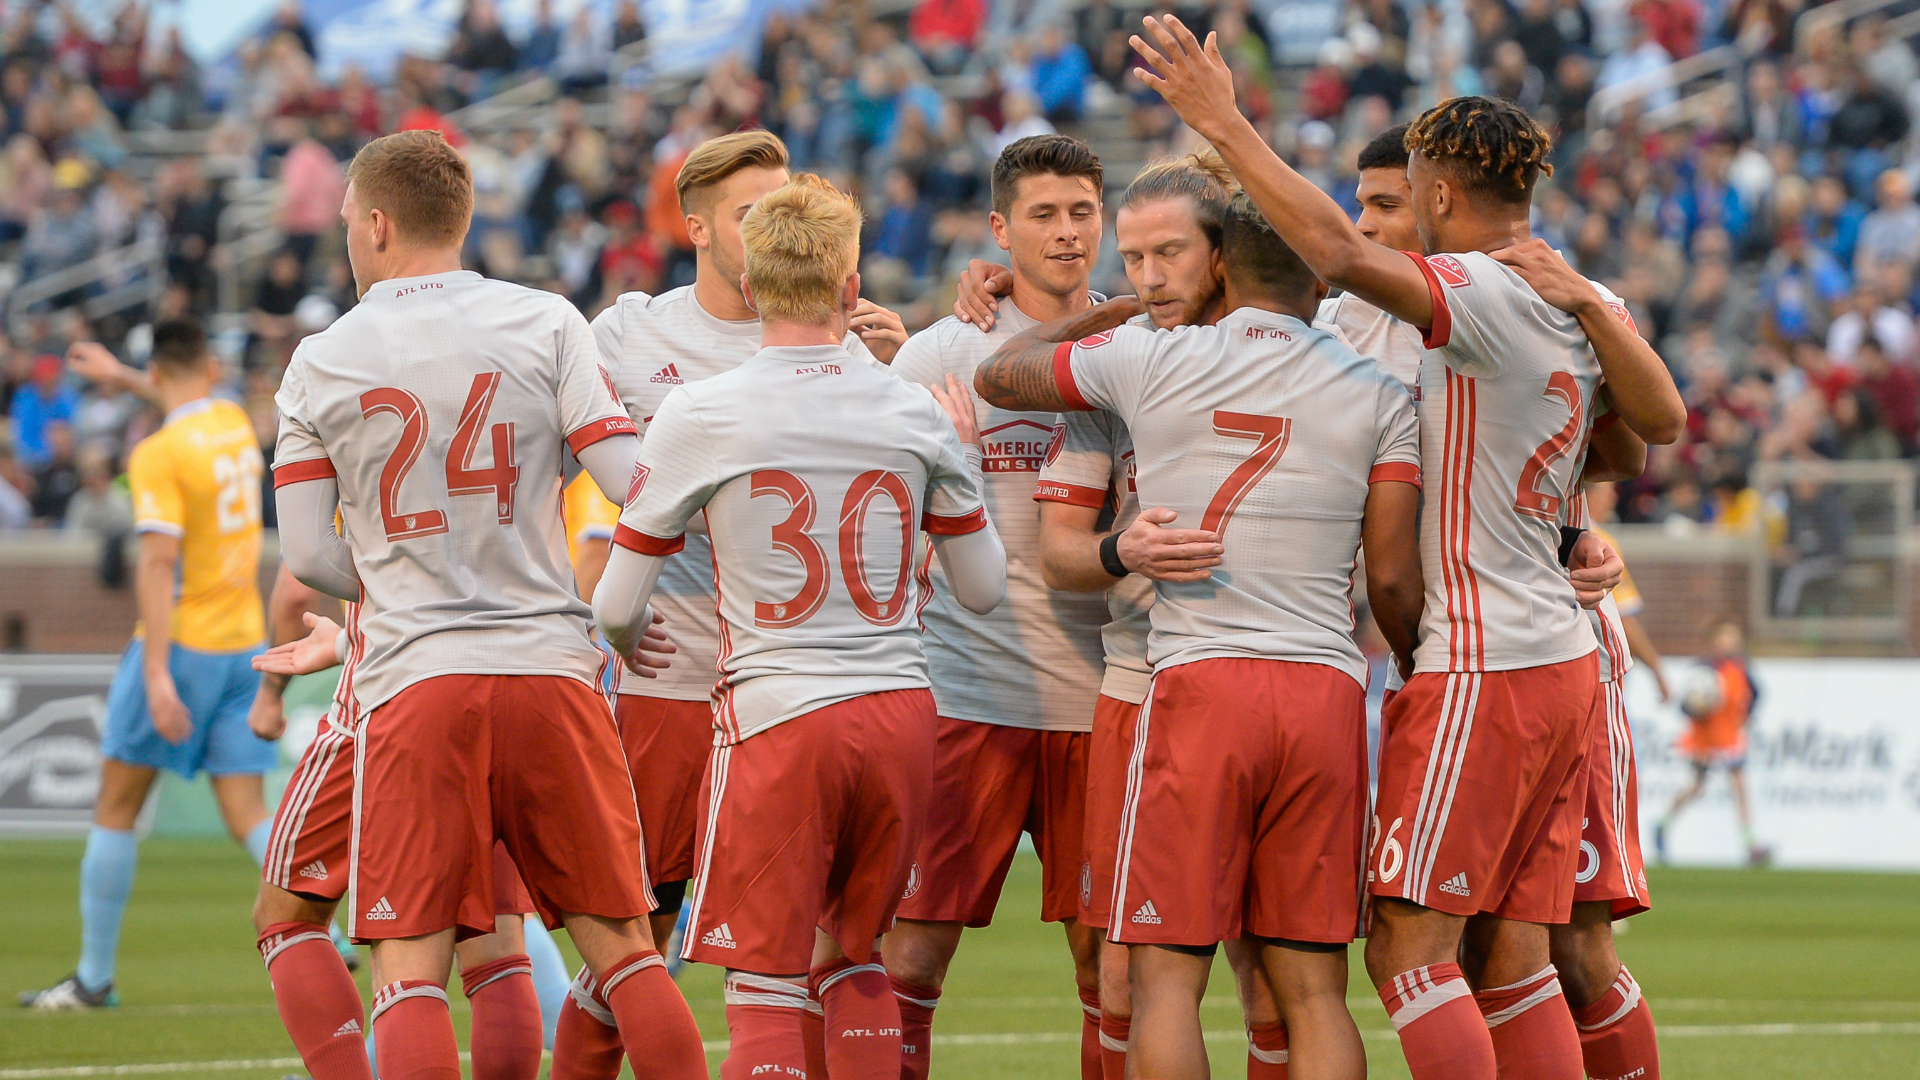 Atlanta United 2017 MLS season preview: Roster, schedule, national TV info and more | Goal.com